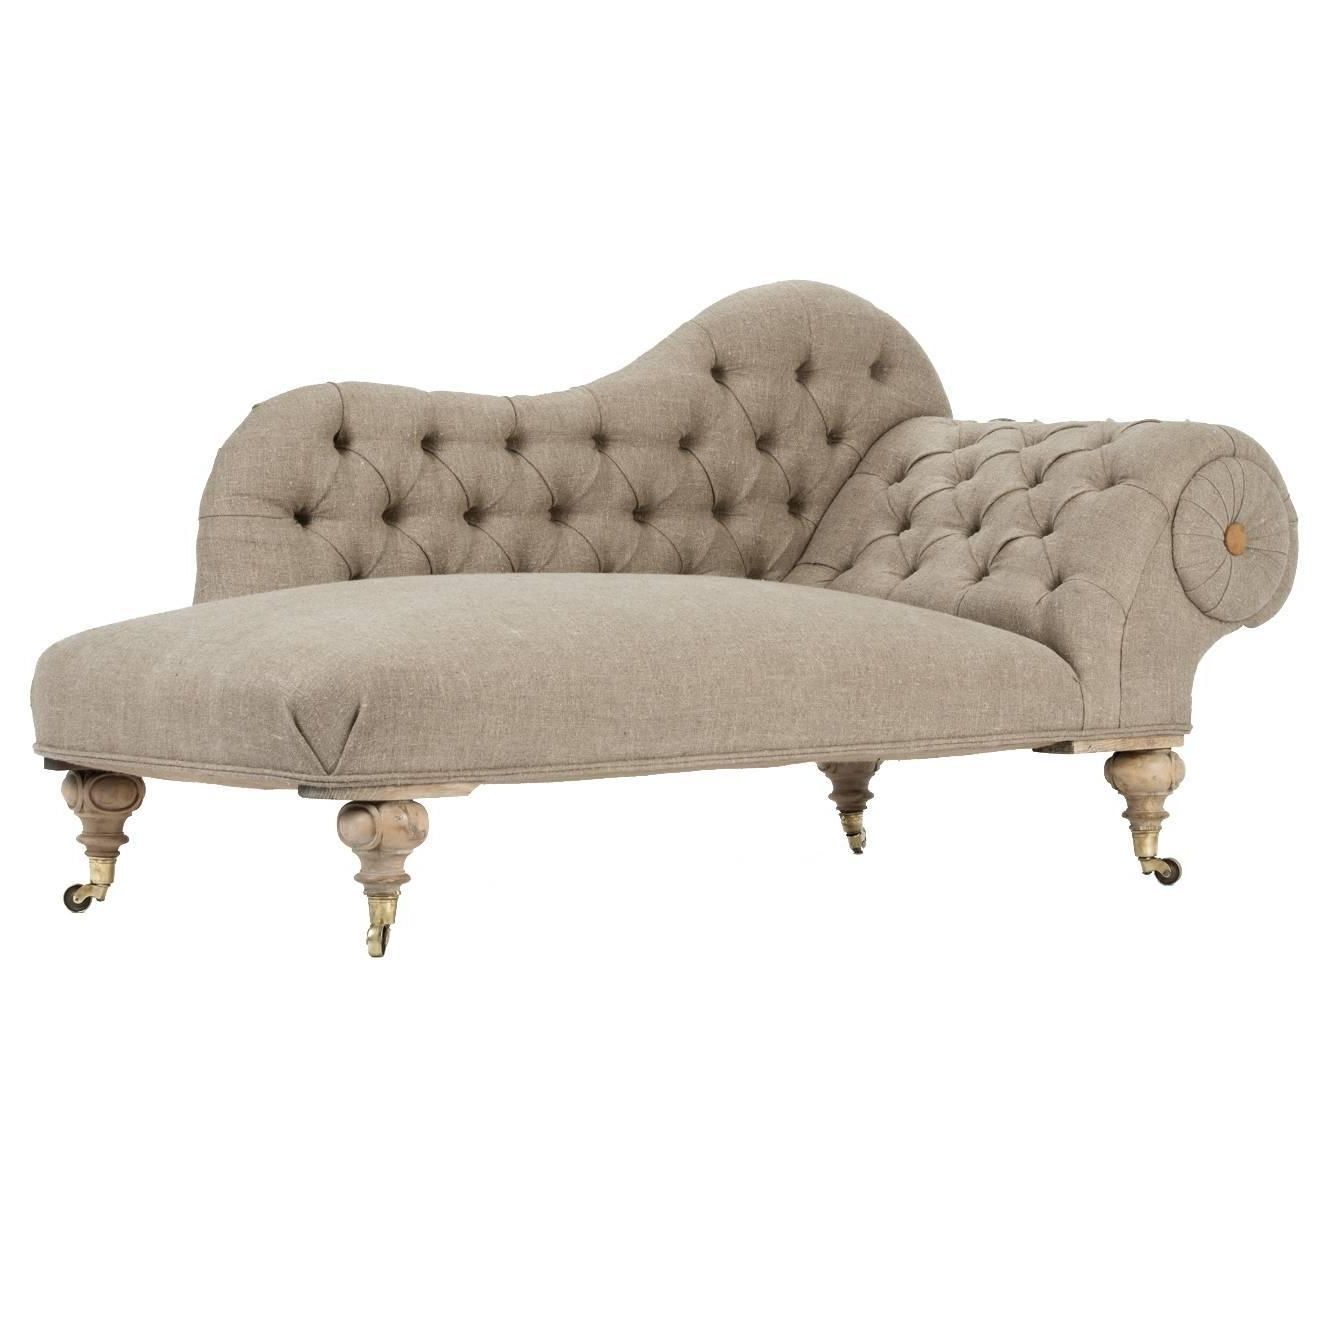 Most Recent Eclectic Late Victorian Scroll Arm Tufted Chaise Longue In Organic Intended For Tufted Chaises (View 13 of 15)